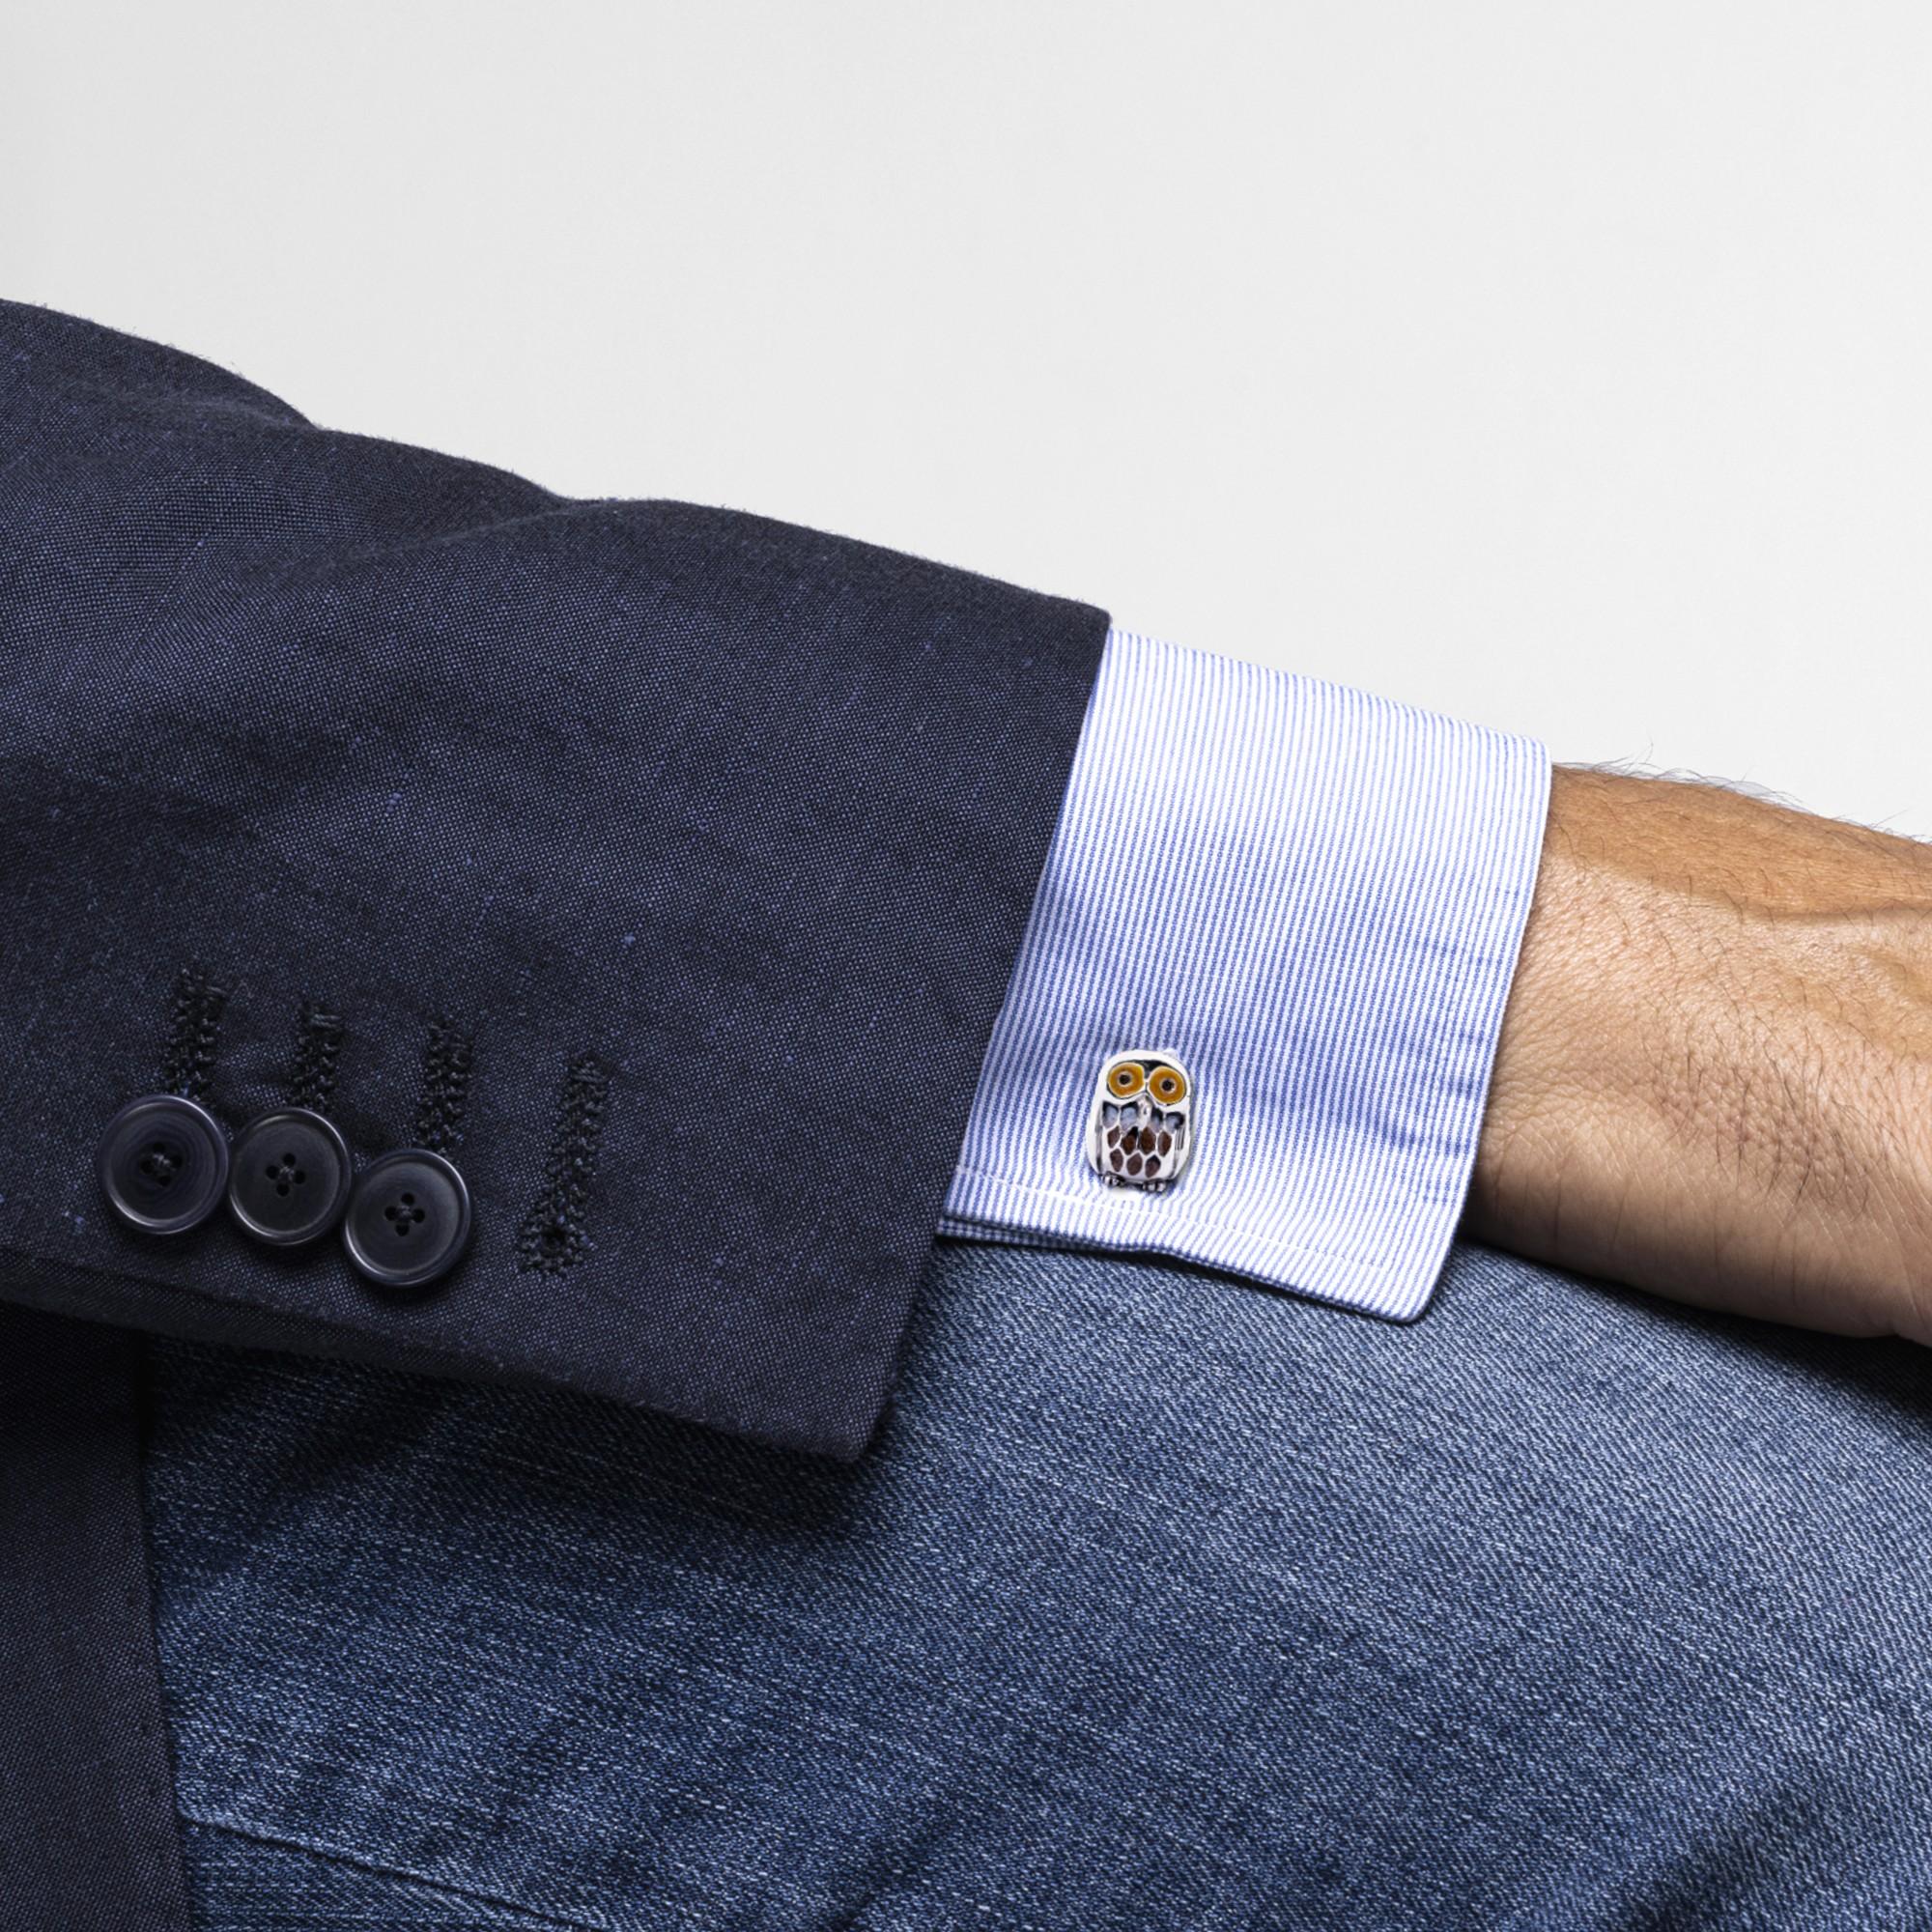 Alex Jona design collection, hand crafted in Italy, rhodium plated sterling owl silver cufflinks with enamel. 
Alex Jona cufflinks stand out, not only for their special design and for the excellent quality, but also for the careful attention given